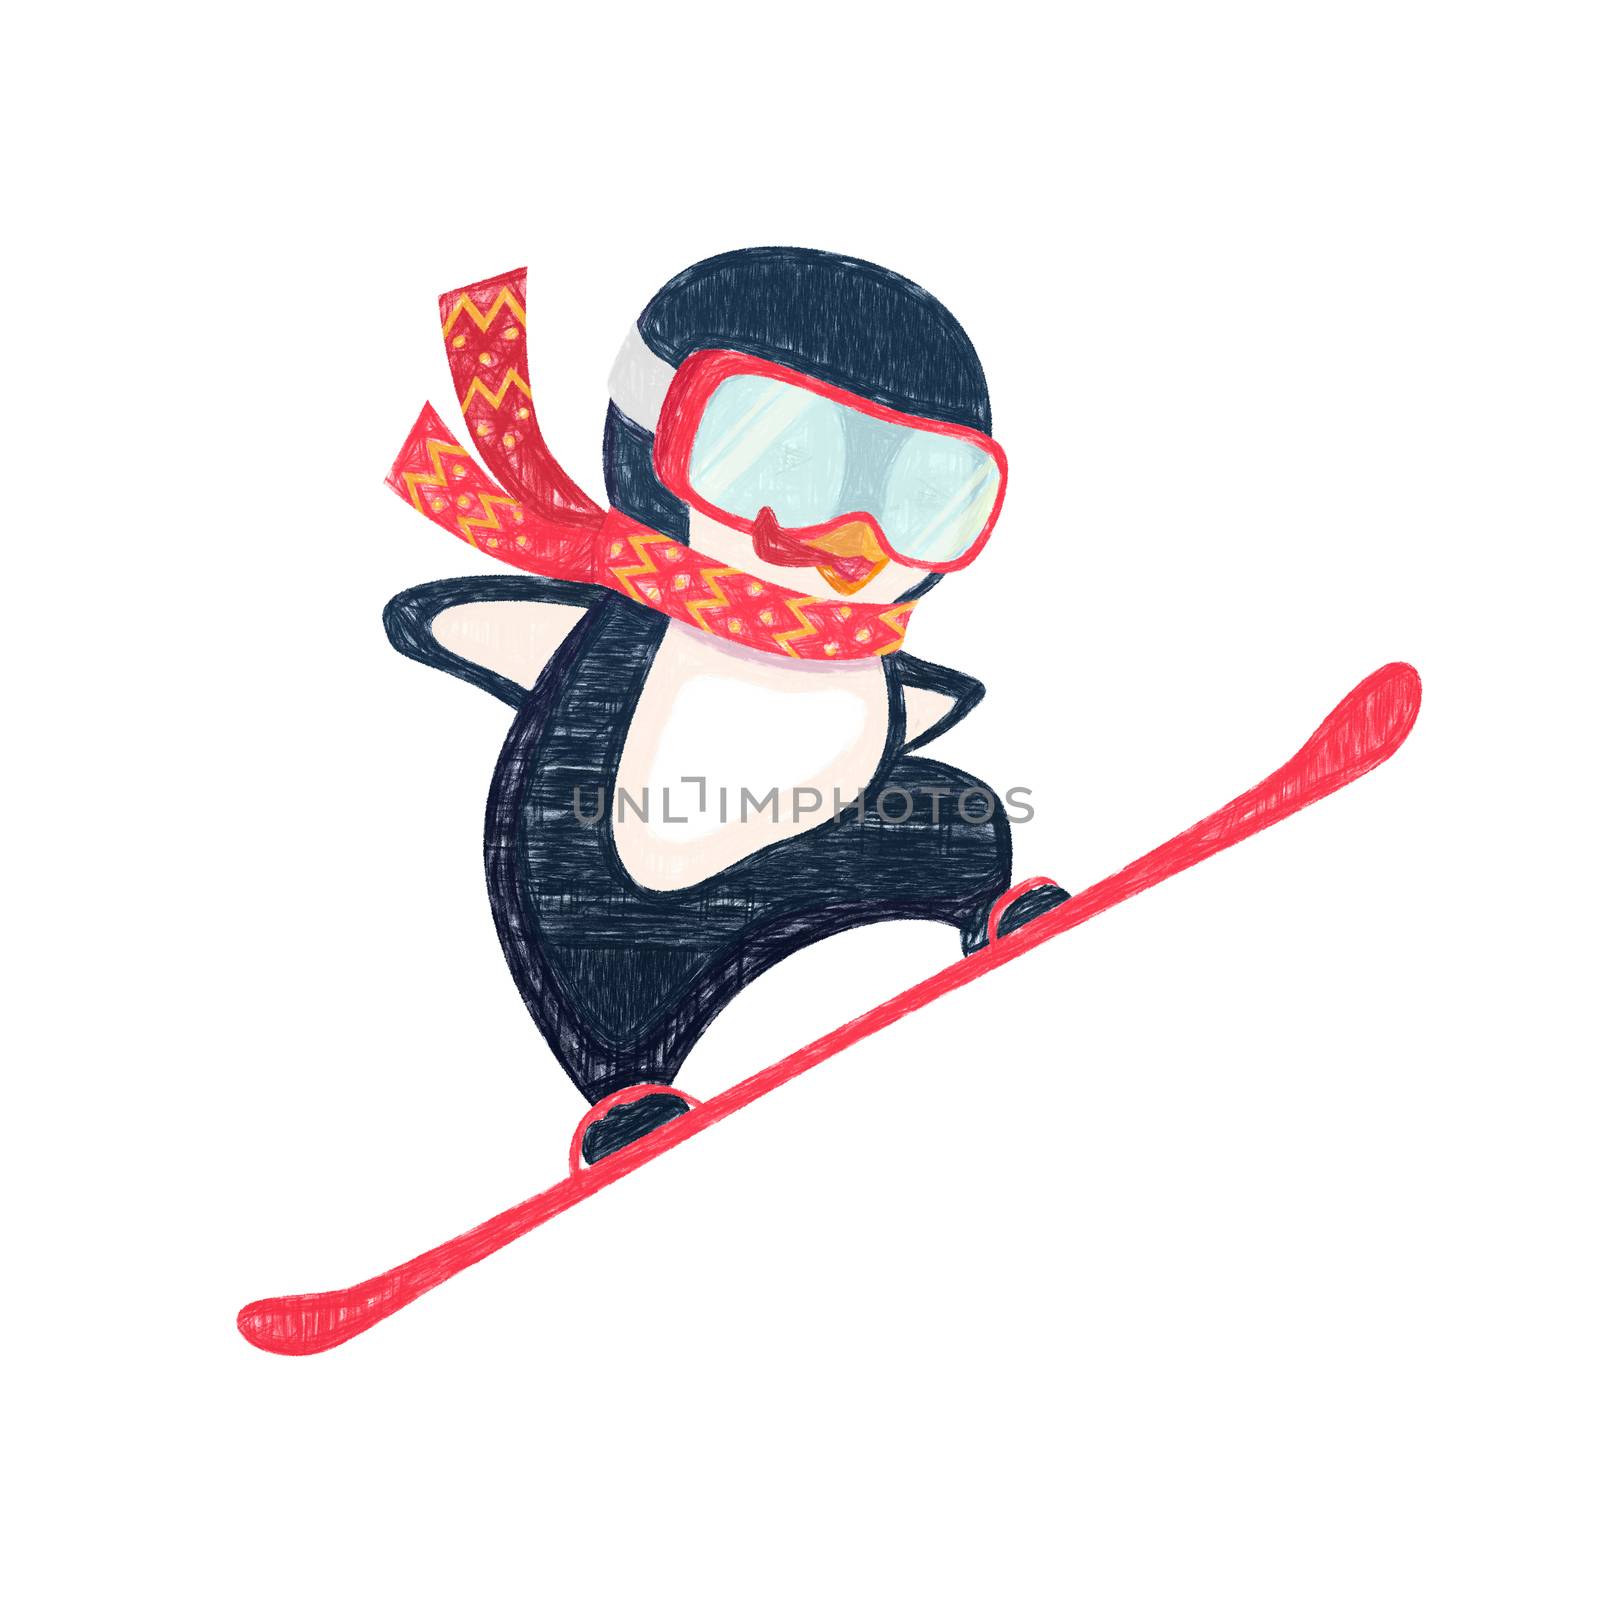 penguin snowboarder at jump by Visual-Content